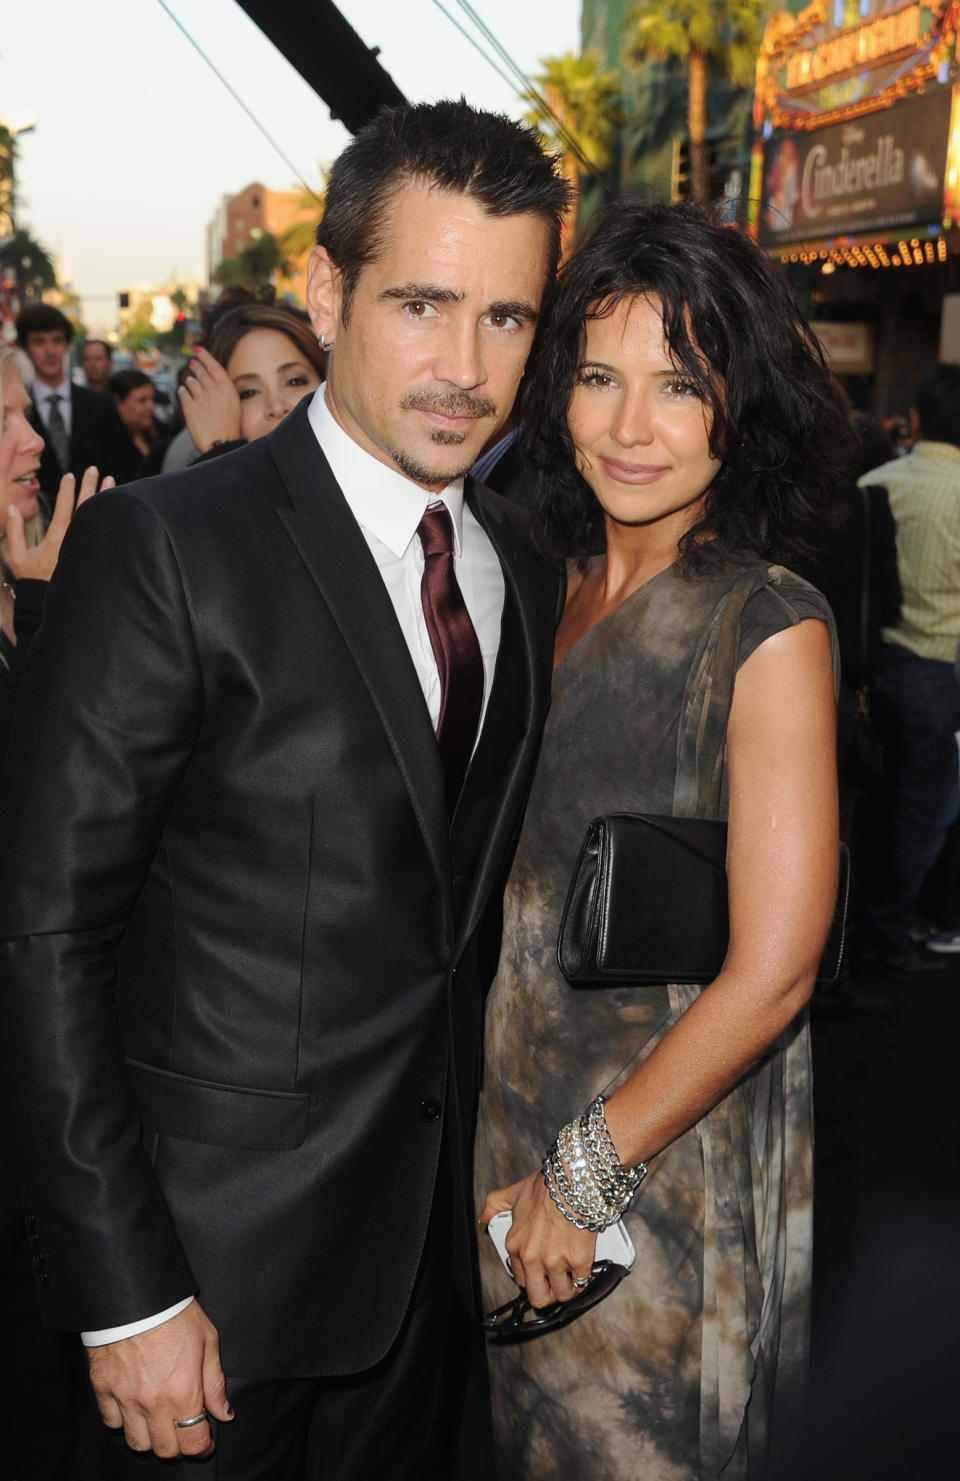 Colin Farrell and guest attend the Los Angeles premiere of "Total Recall" on August 1, 2012.